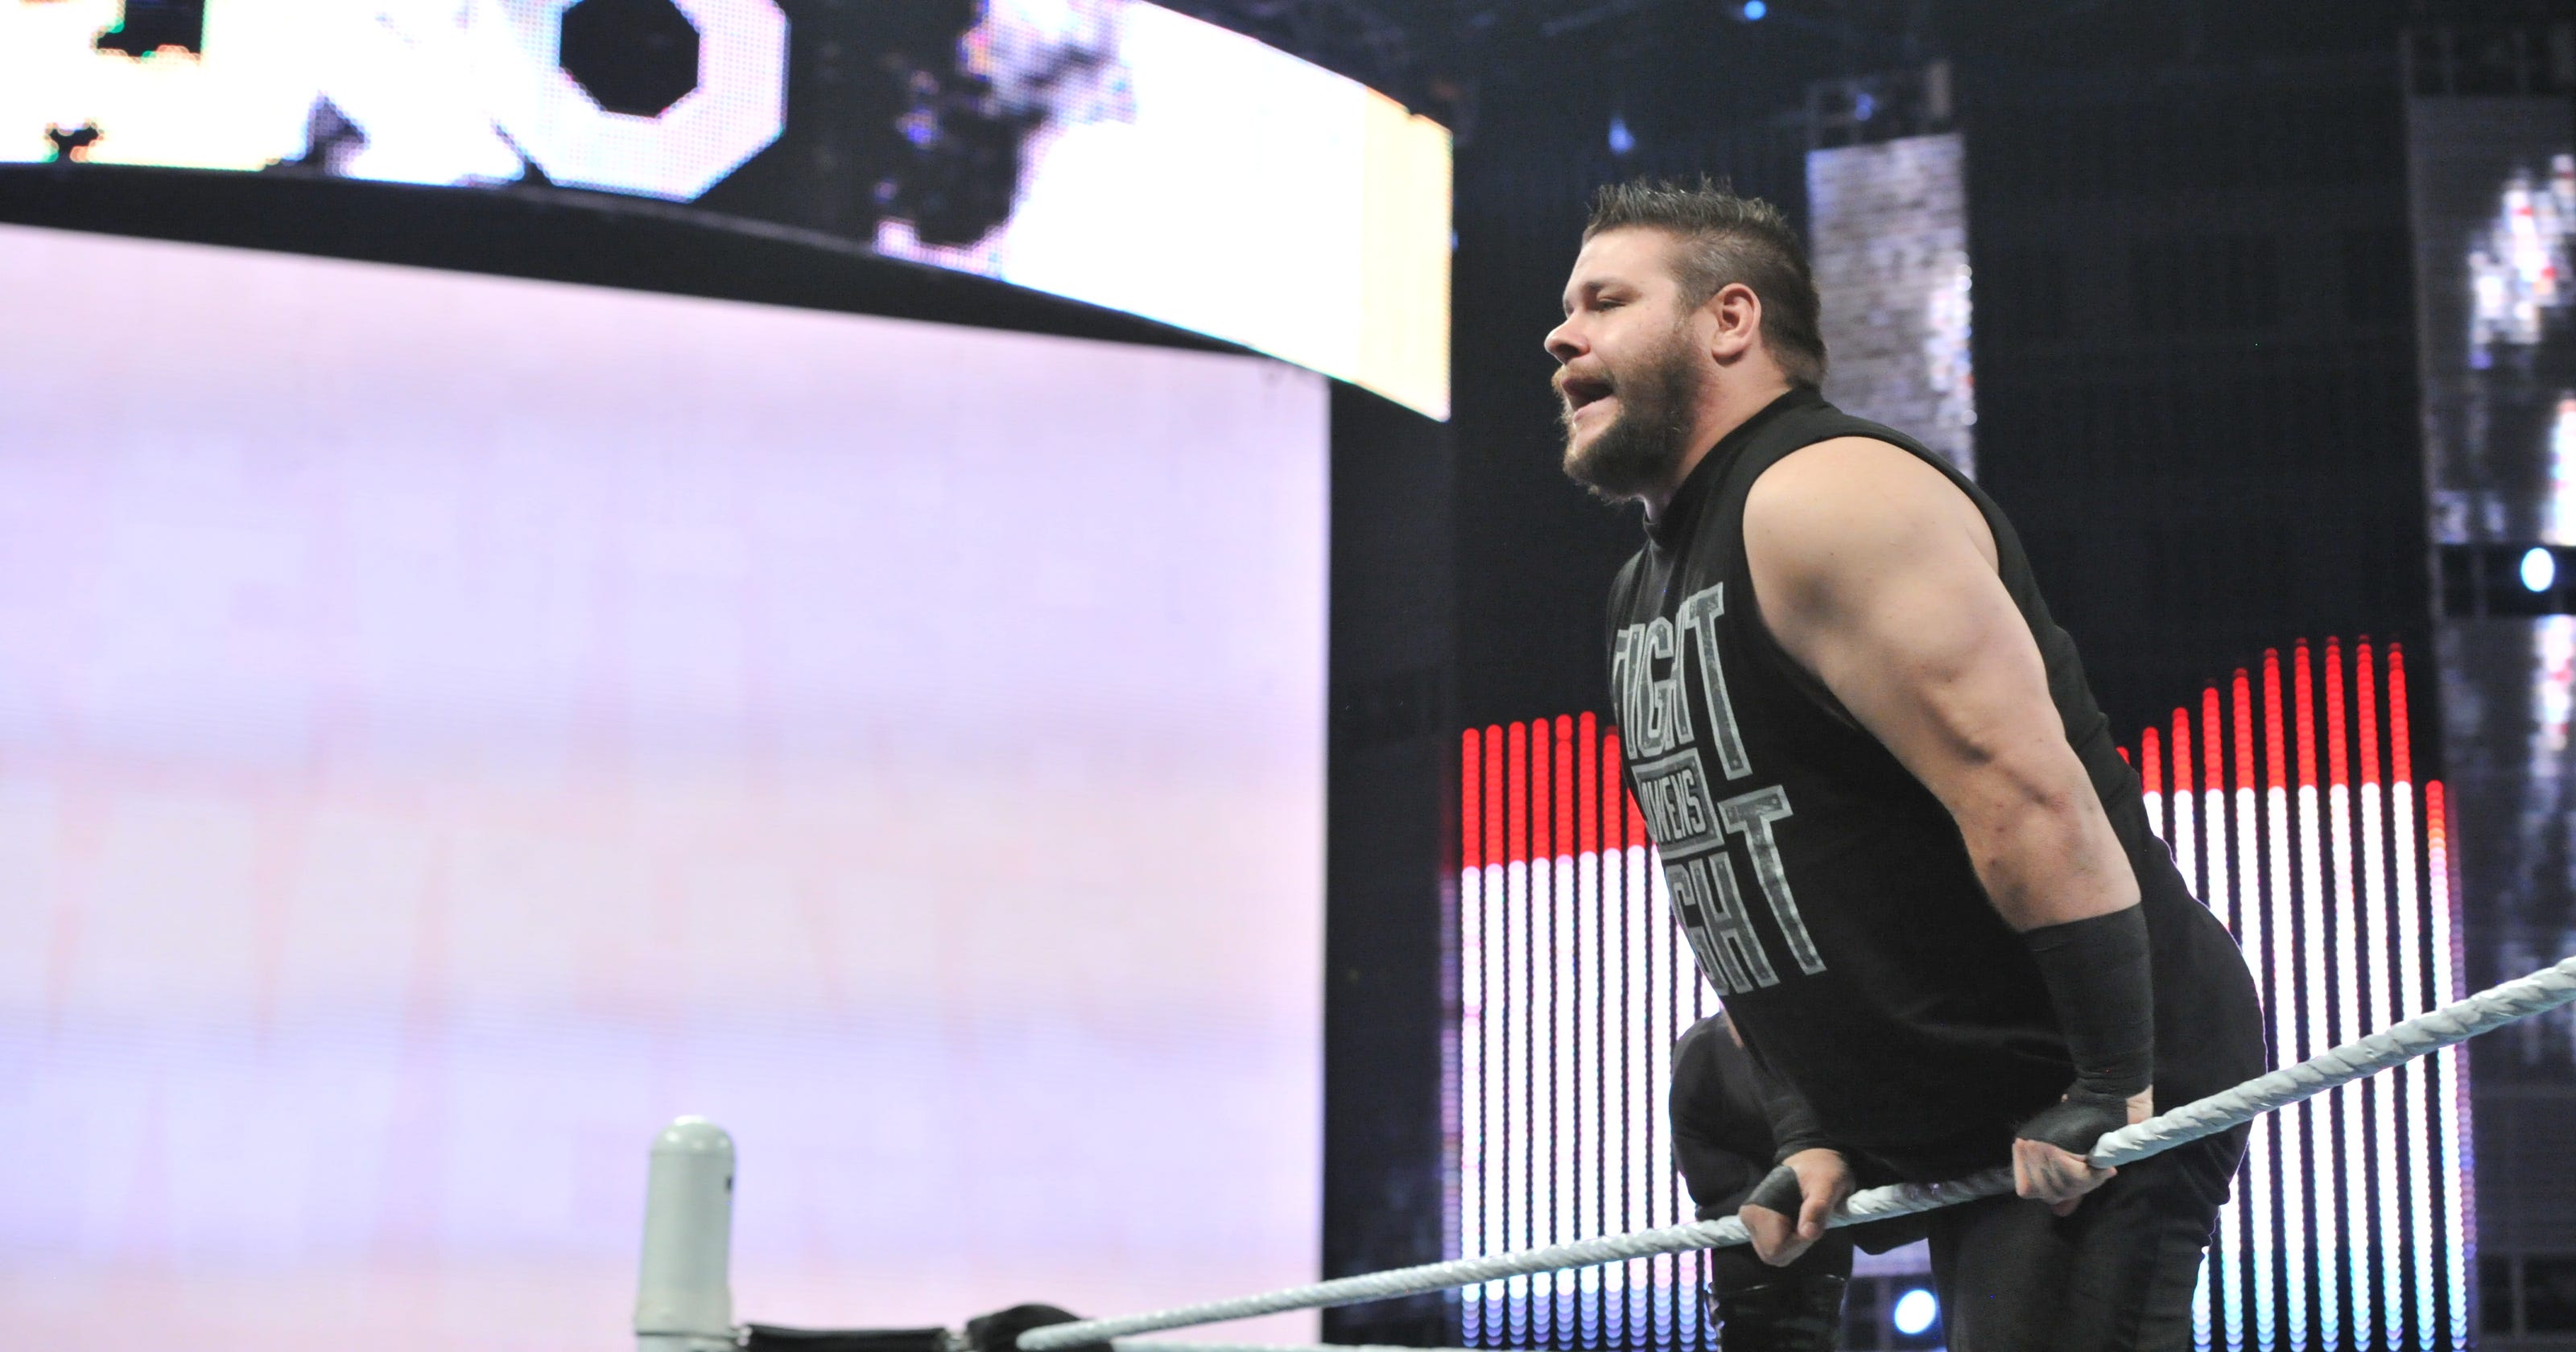 Wwe Raw Kevin Owens Coming To Sioux Falls On Monday Night